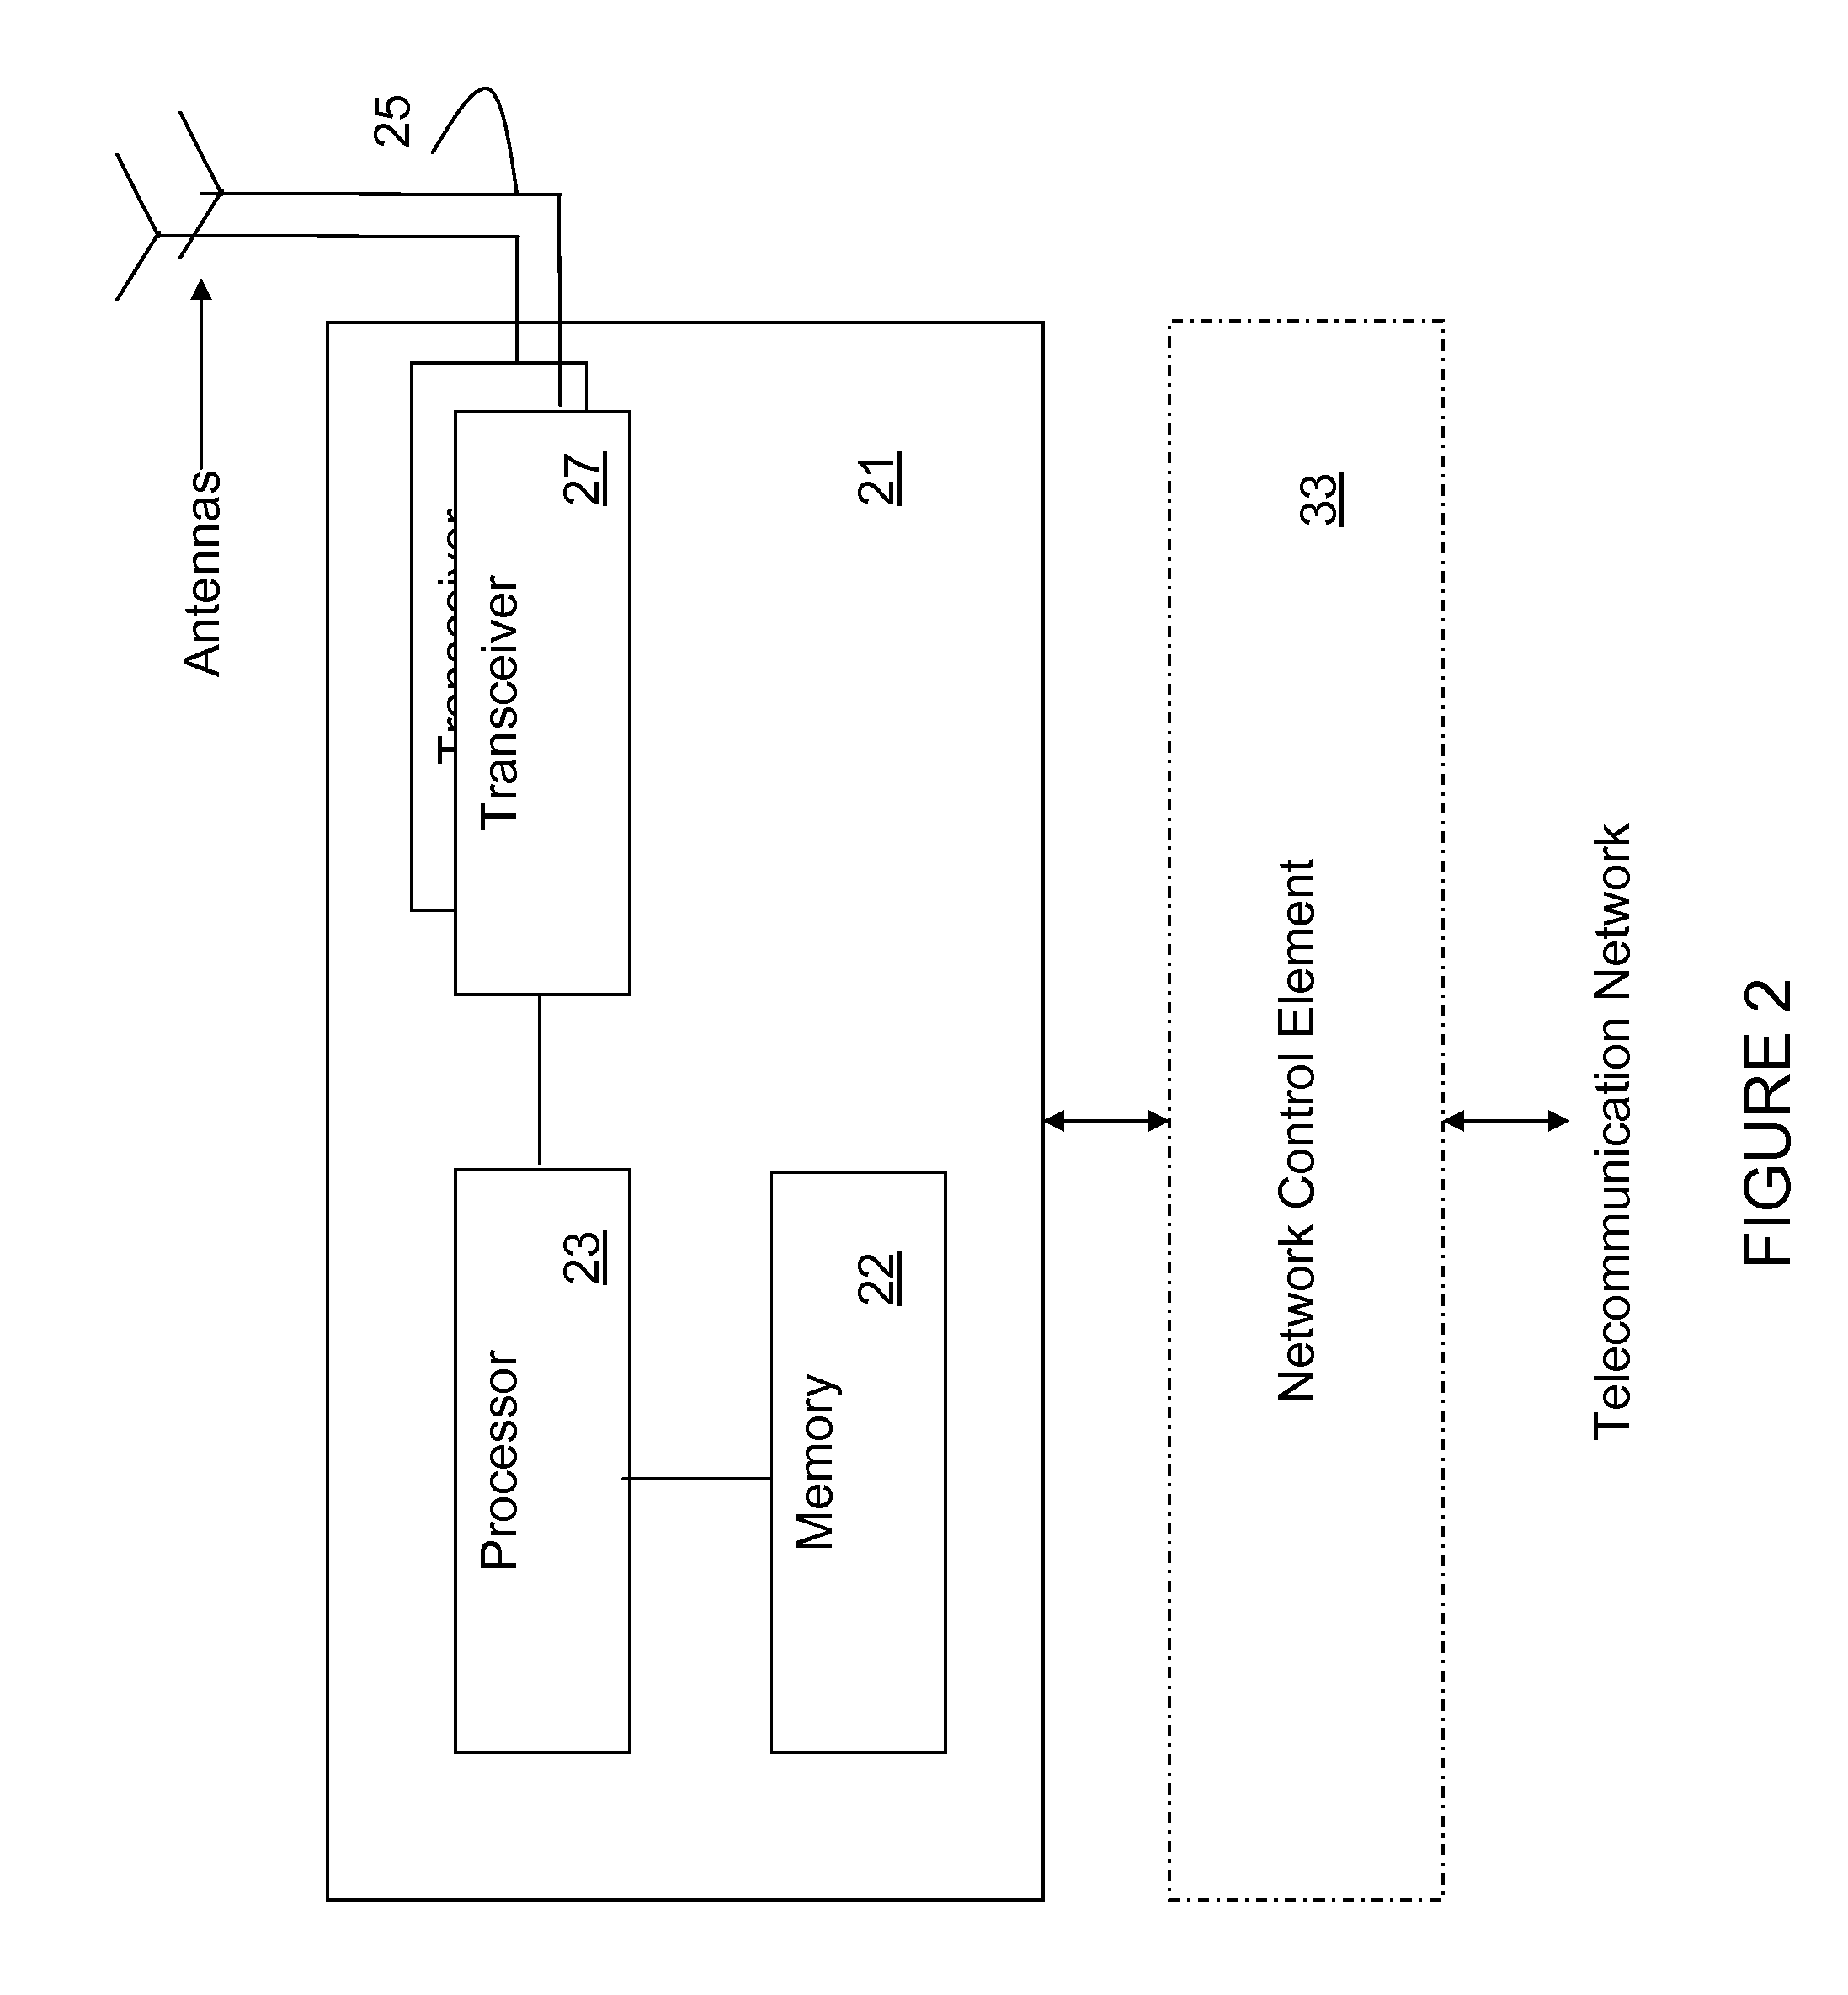 Control Signaling for Multiple Carrier High Speed Uplink Packet Access in Radio Frequency Communication Systems